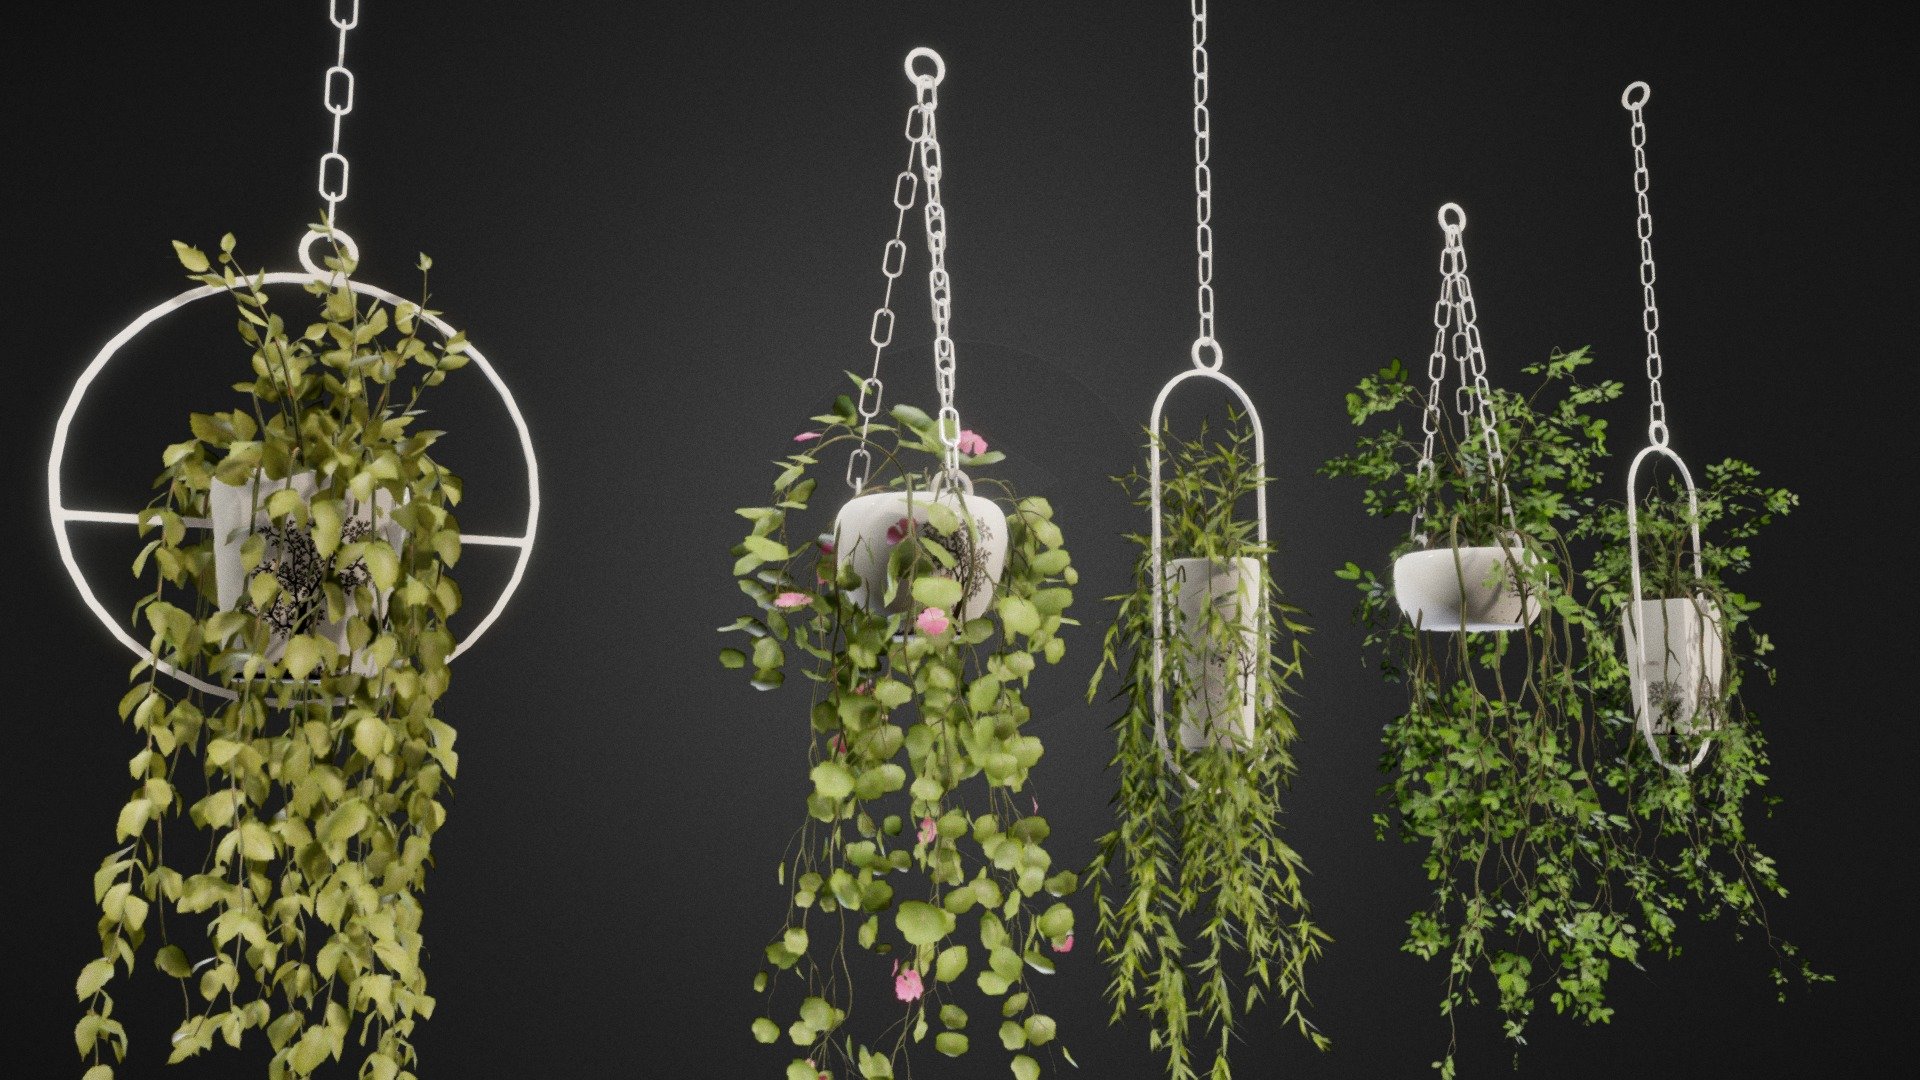 Hanging Pots with Plants/Vines with 4k and 2k textures.
All the maps included in the blend file and also packed in additional files.you can easily apply them onto the model based on material ID.
3 Additional Blend files also included:-
* Hanging pots only
* vines/Plants only
* Pots and vines combined
Thank You! - Hanging Pots with Plants/Vines - Buy Royalty Free 3D model by Nicholas-3D (@Nicholas01) 3d model